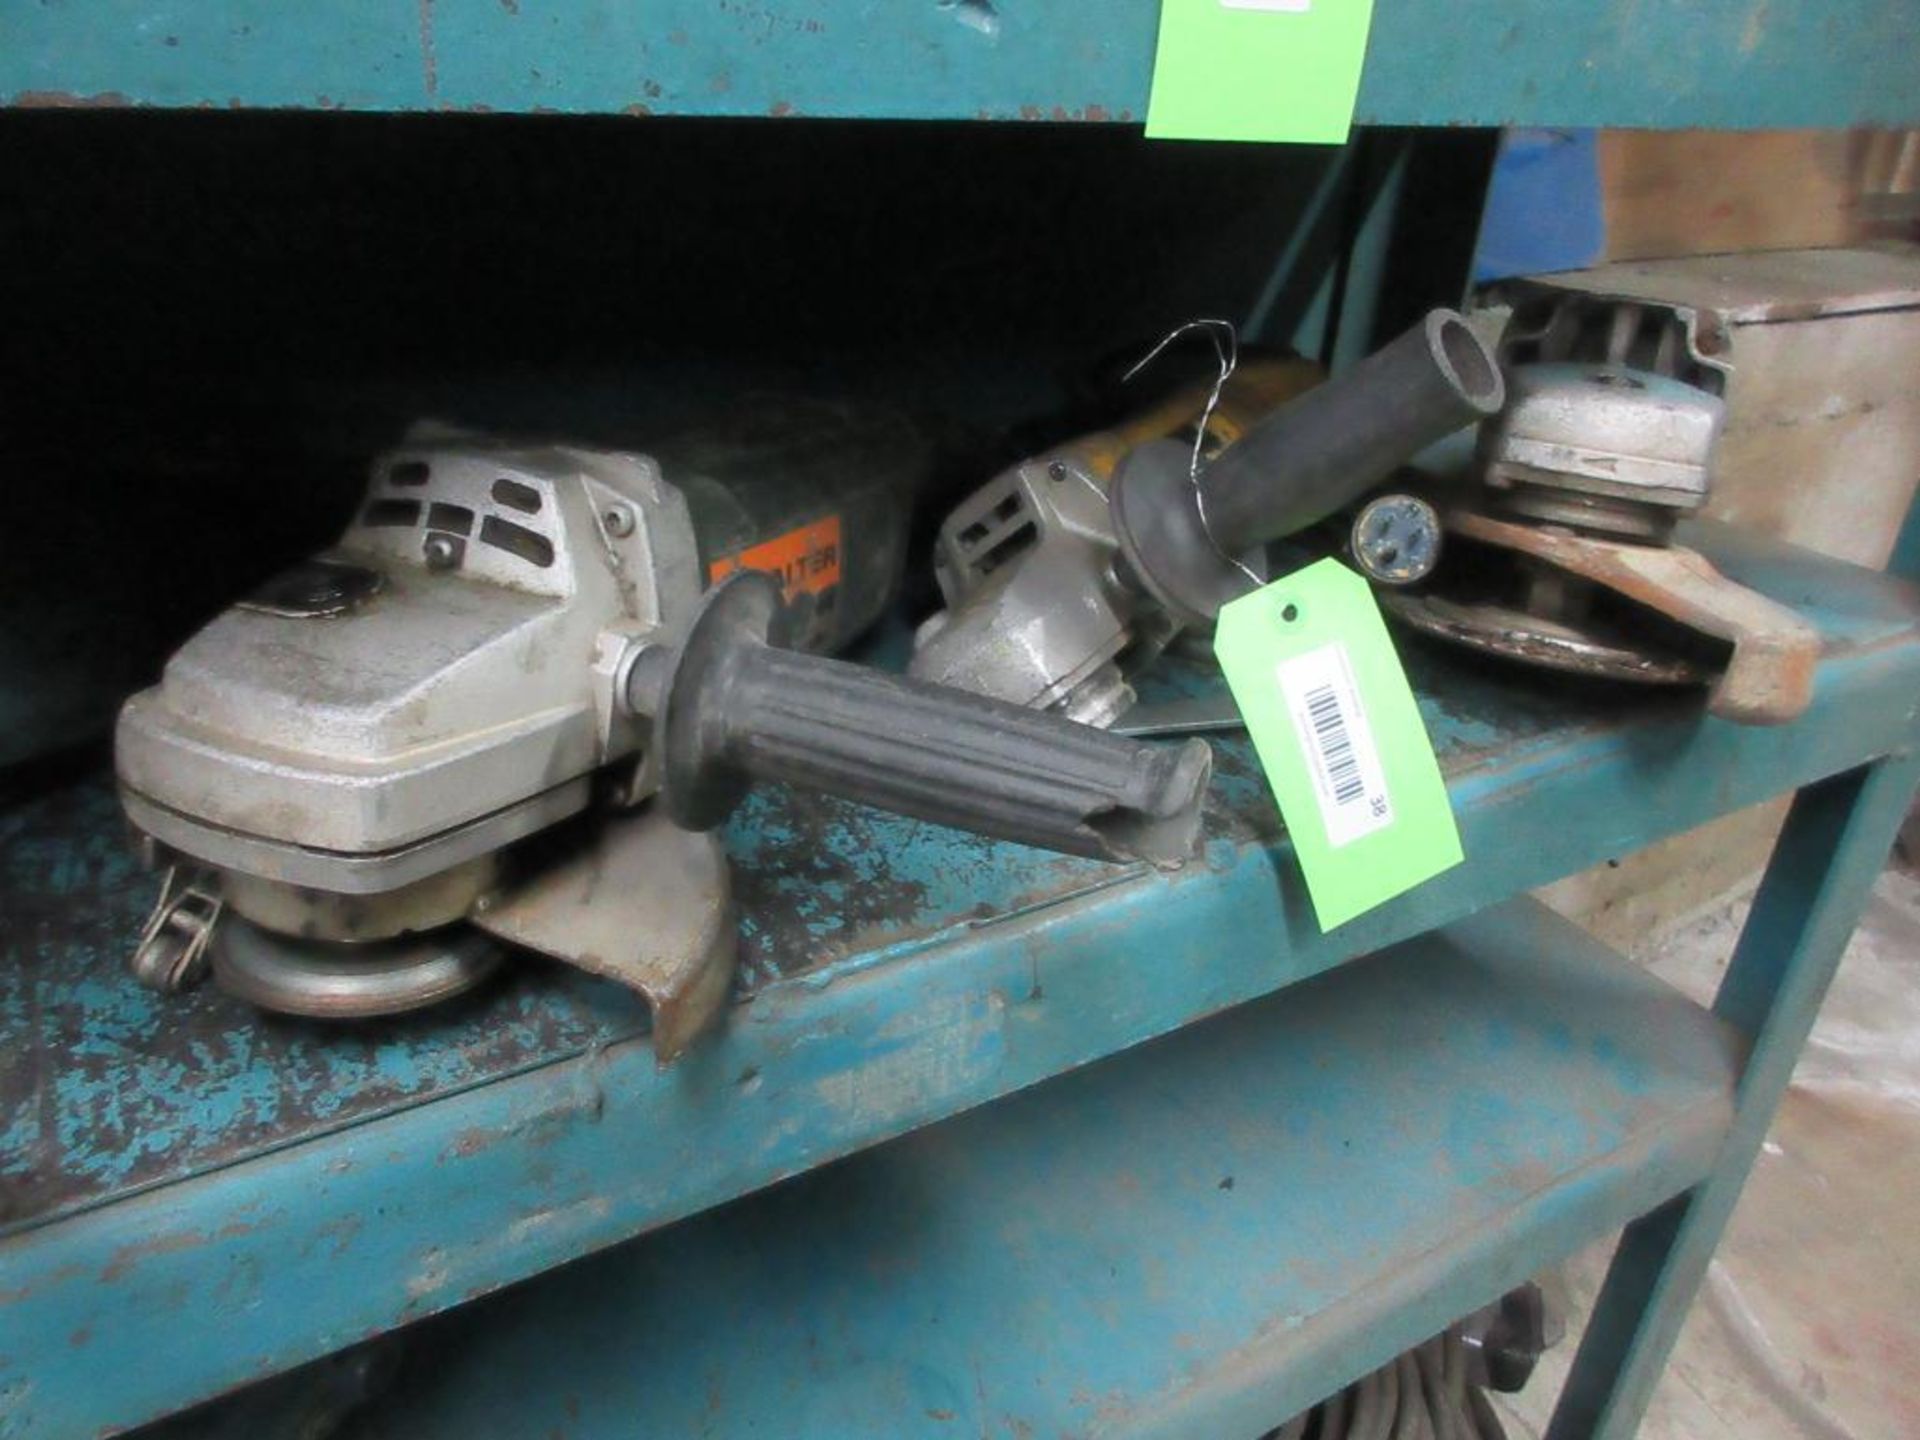 LOT OF 3 HEAVY DUTY ANGLE GRINDERS INCL 7" WALTER/METABO, 4 1/2" DEWALT AND 7" BLACK AND DECKER (IN - Image 2 of 2